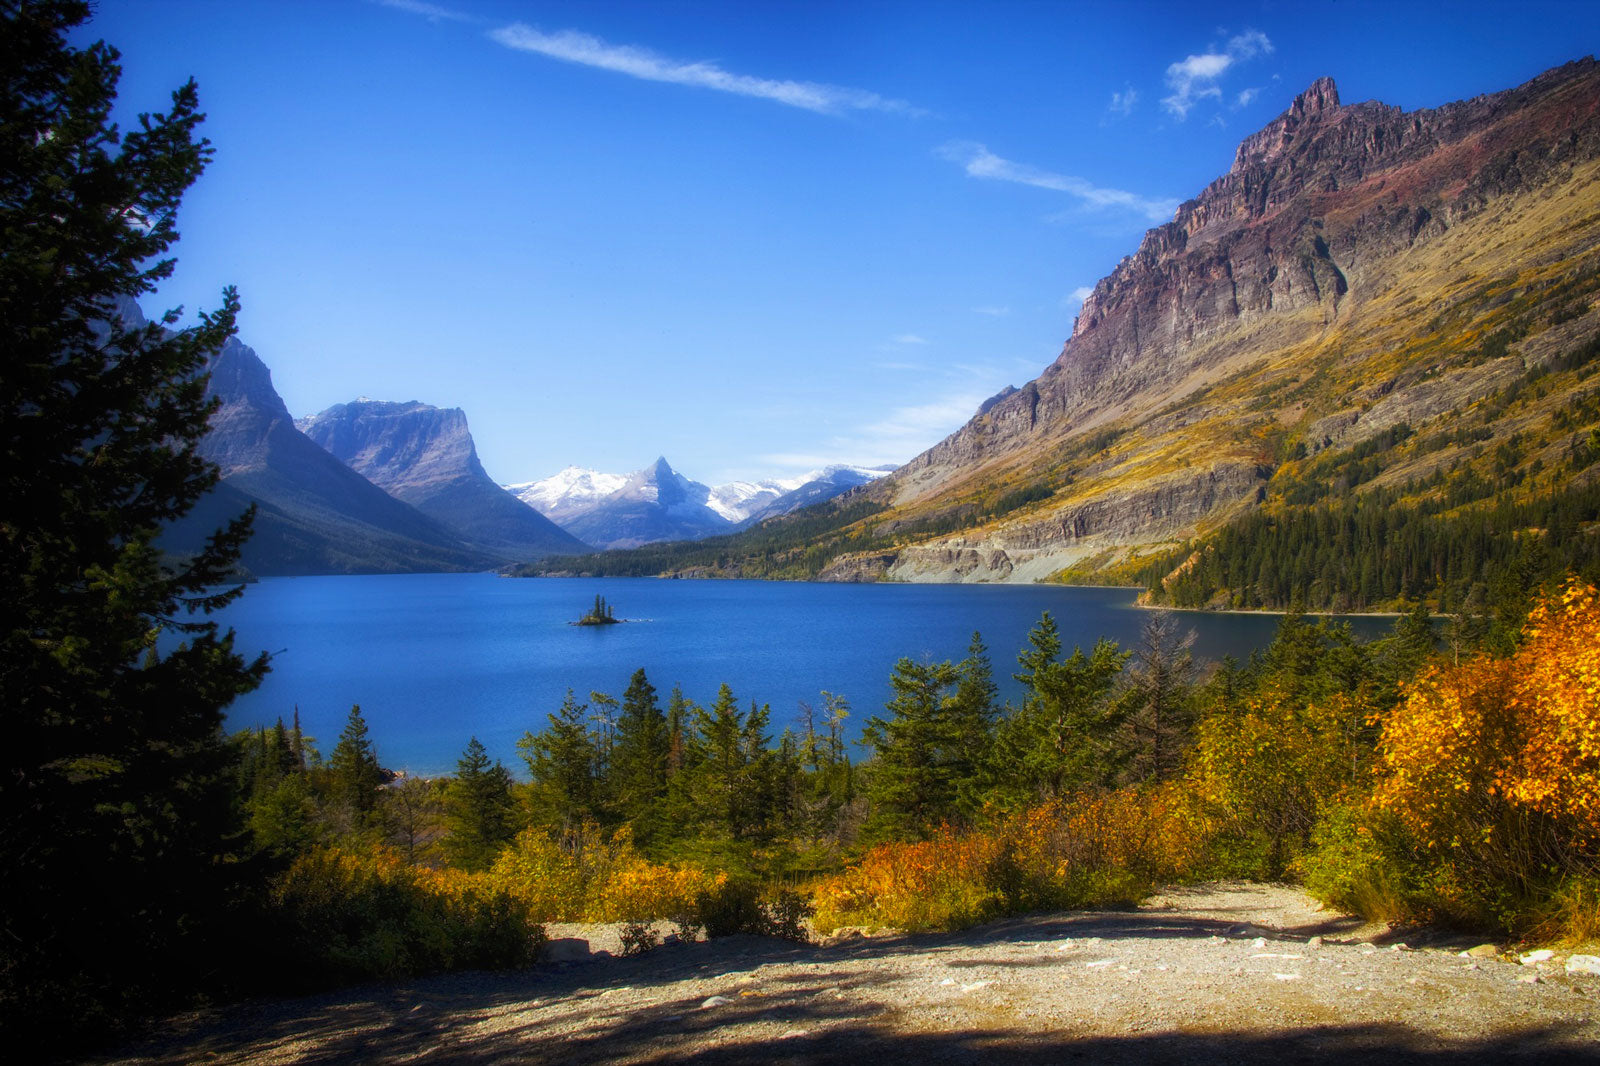 Glacier national park during fall season with fall leaves on bushes in front of lake.